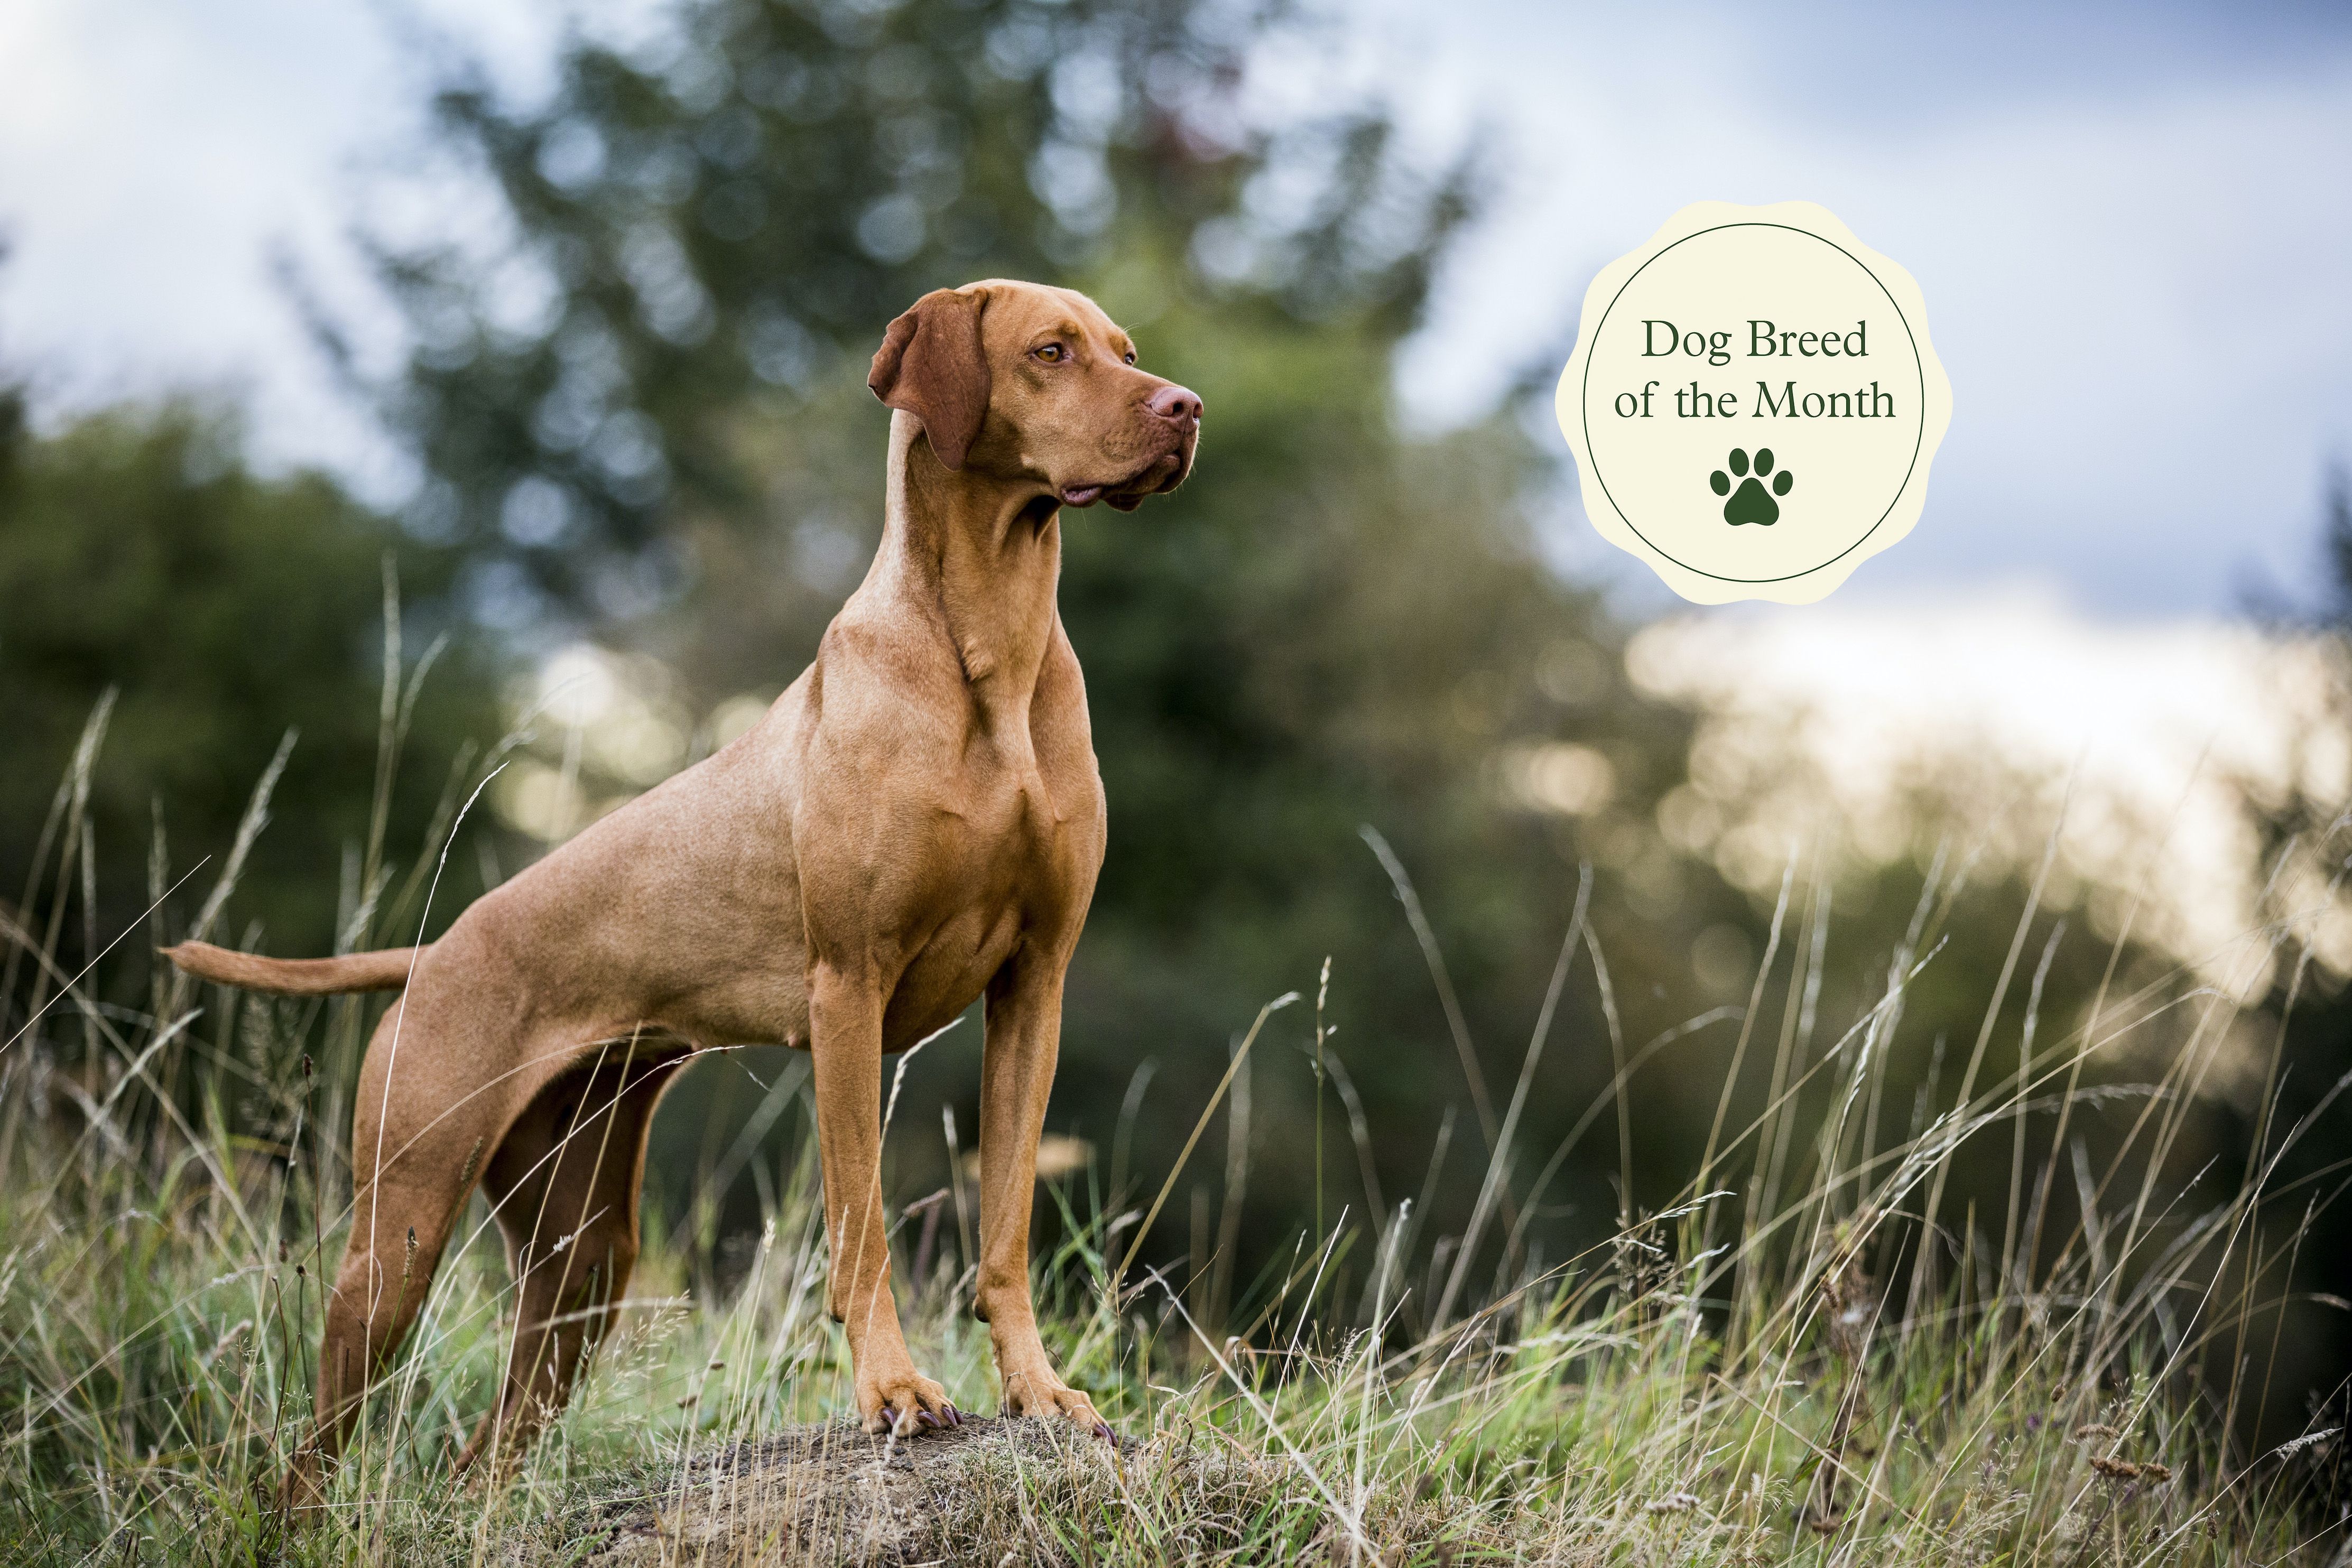 at what age is a vizsla fully grown